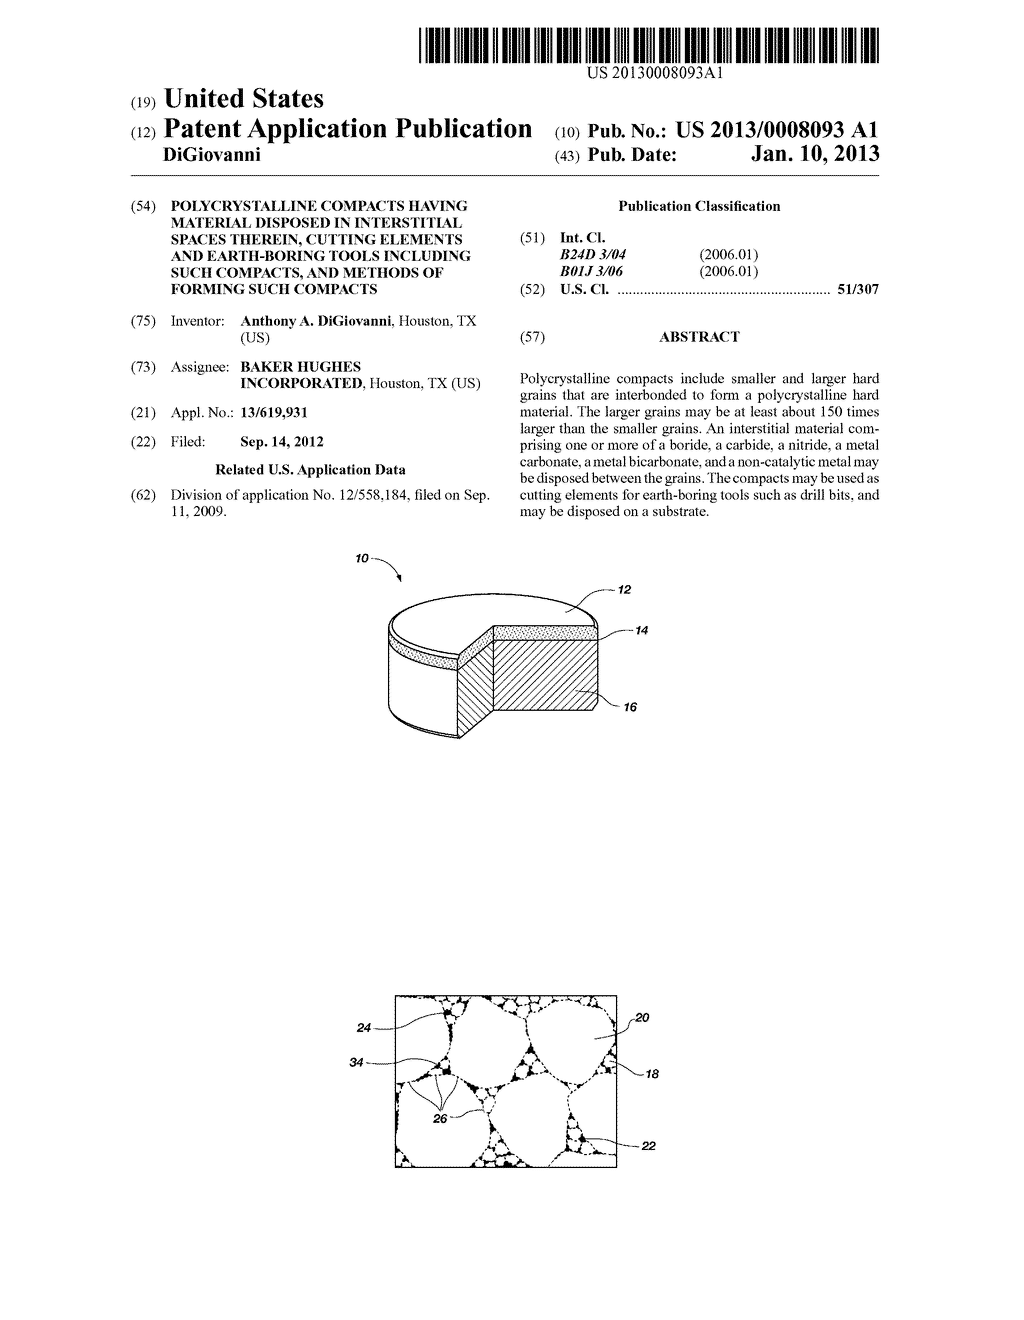 POLYCRYSTALLINE COMPACTS HAVING MATERIAL DISPOSED IN INTERSTITIAL SPACES     THEREIN, CUTTING ELEMENTS AND EARTH-BORING TOOLS INCLUDING SUCH COMPACTS,     AND METHODS OF FORMING SUCH COMPACTS - diagram, schematic, and image 01